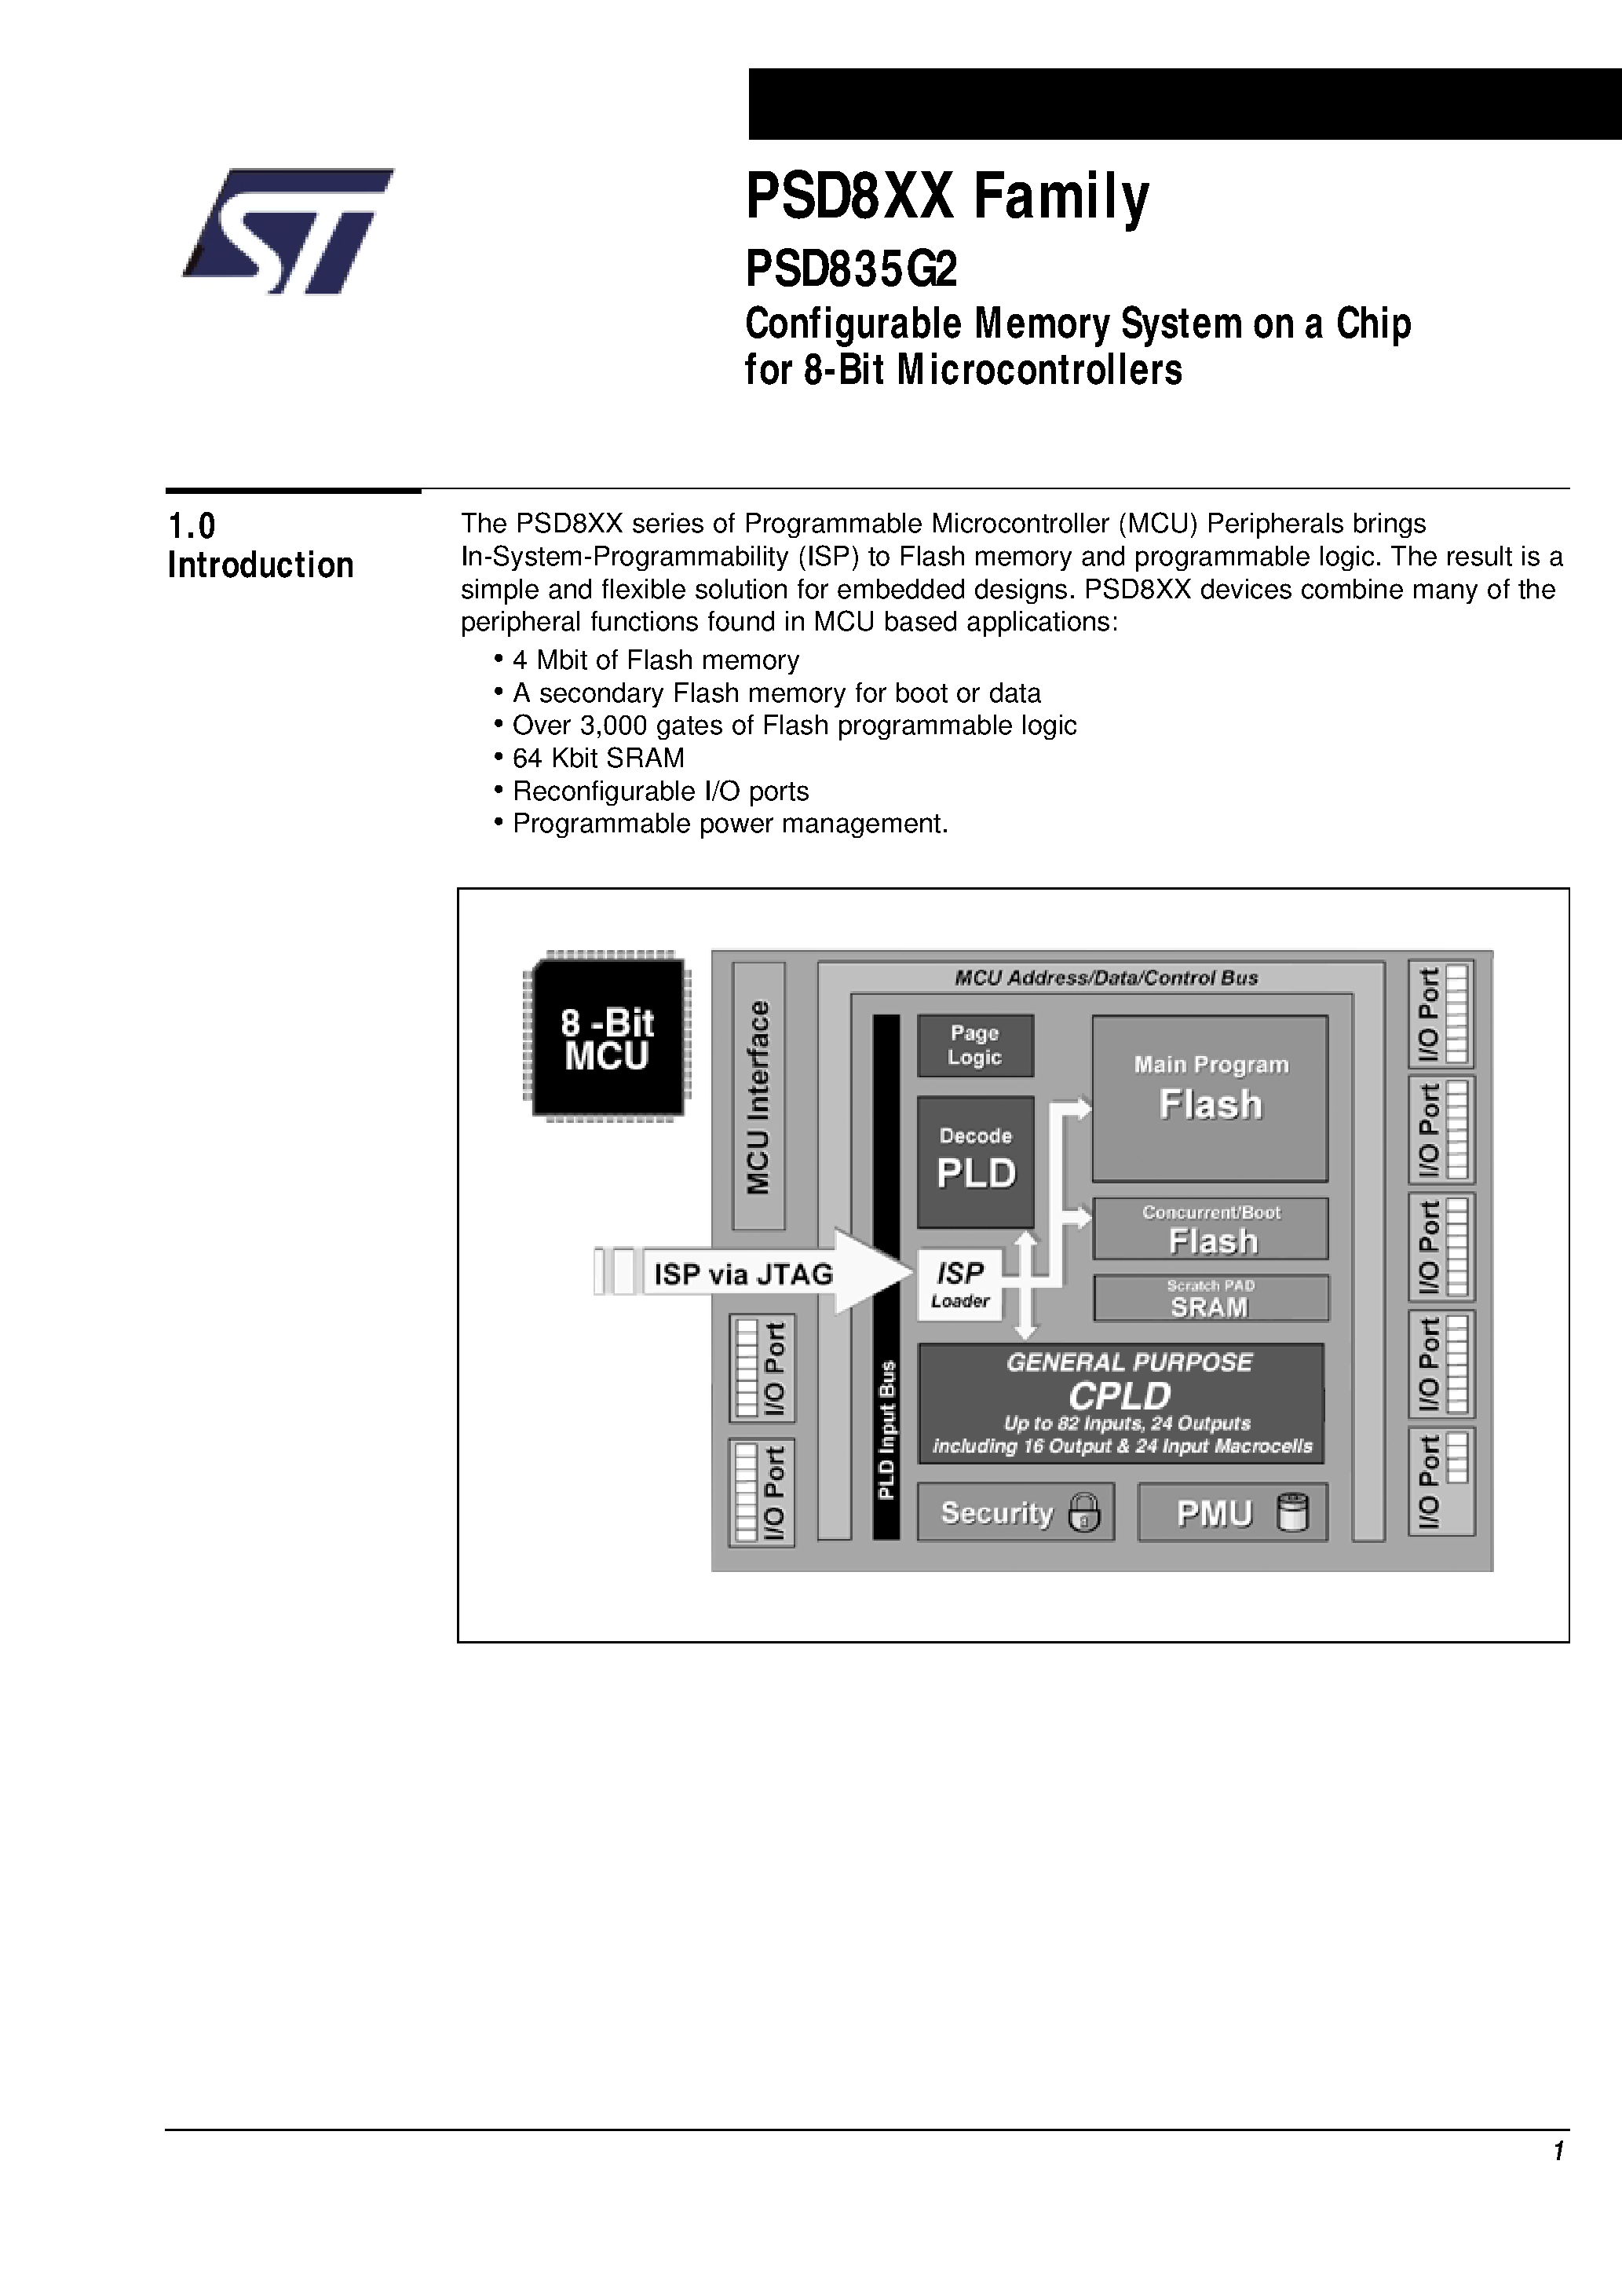 Datasheet PSD835F1V-A-15J - Configurable Memory System on a Chip for 8-Bit Microcontrollers page 2